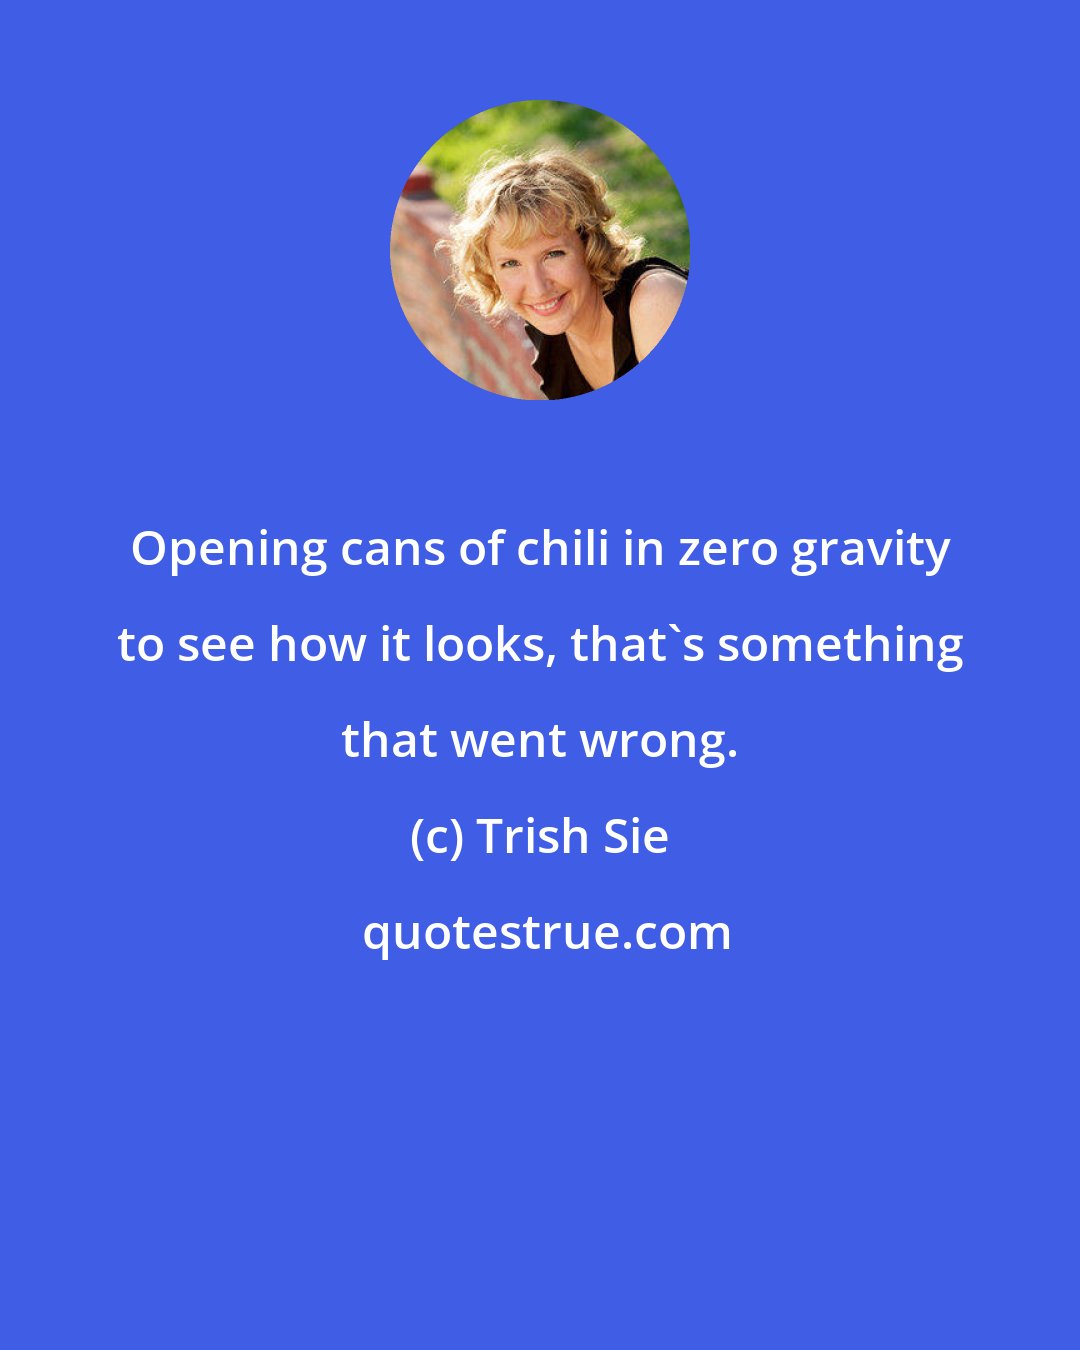 Trish Sie: Opening cans of chili in zero gravity to see how it looks, that's something that went wrong.